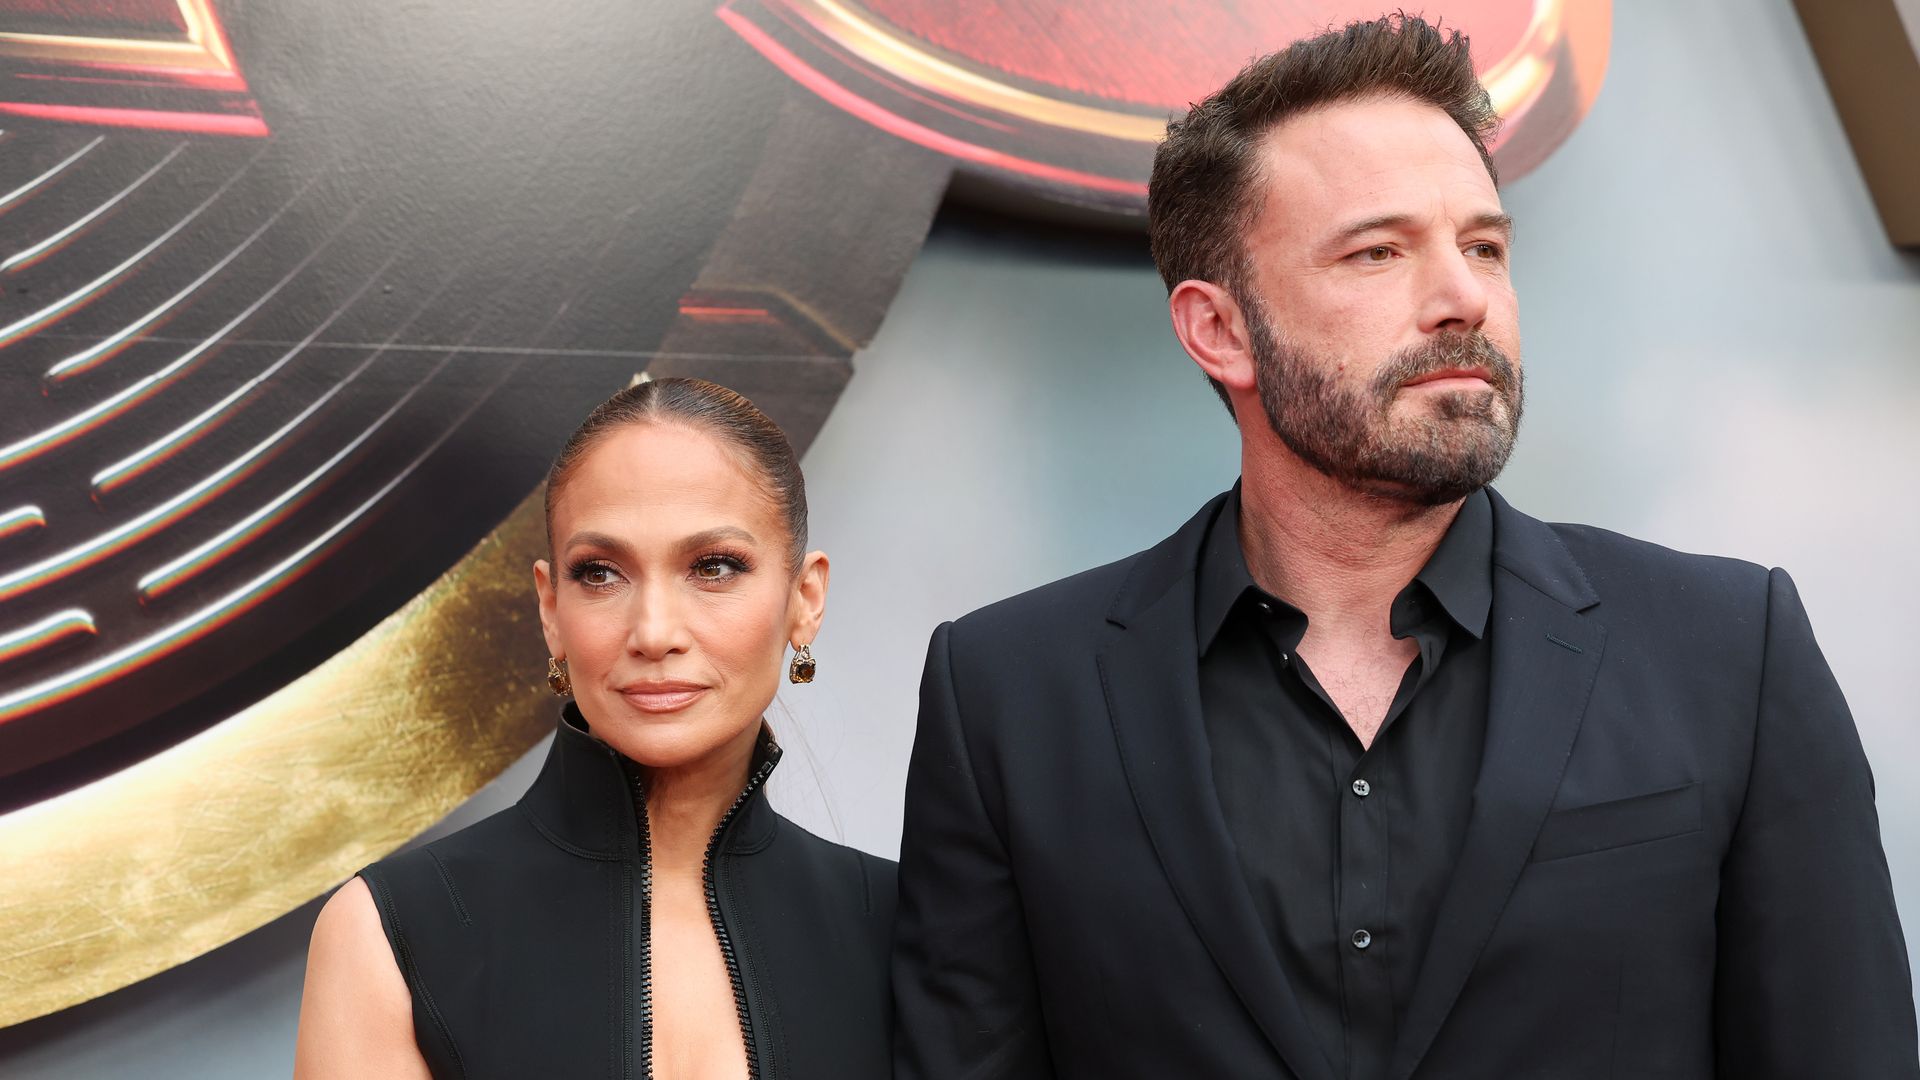 Jennifer Lopez and Ben Affleck are reportedly selling art pieces from their home